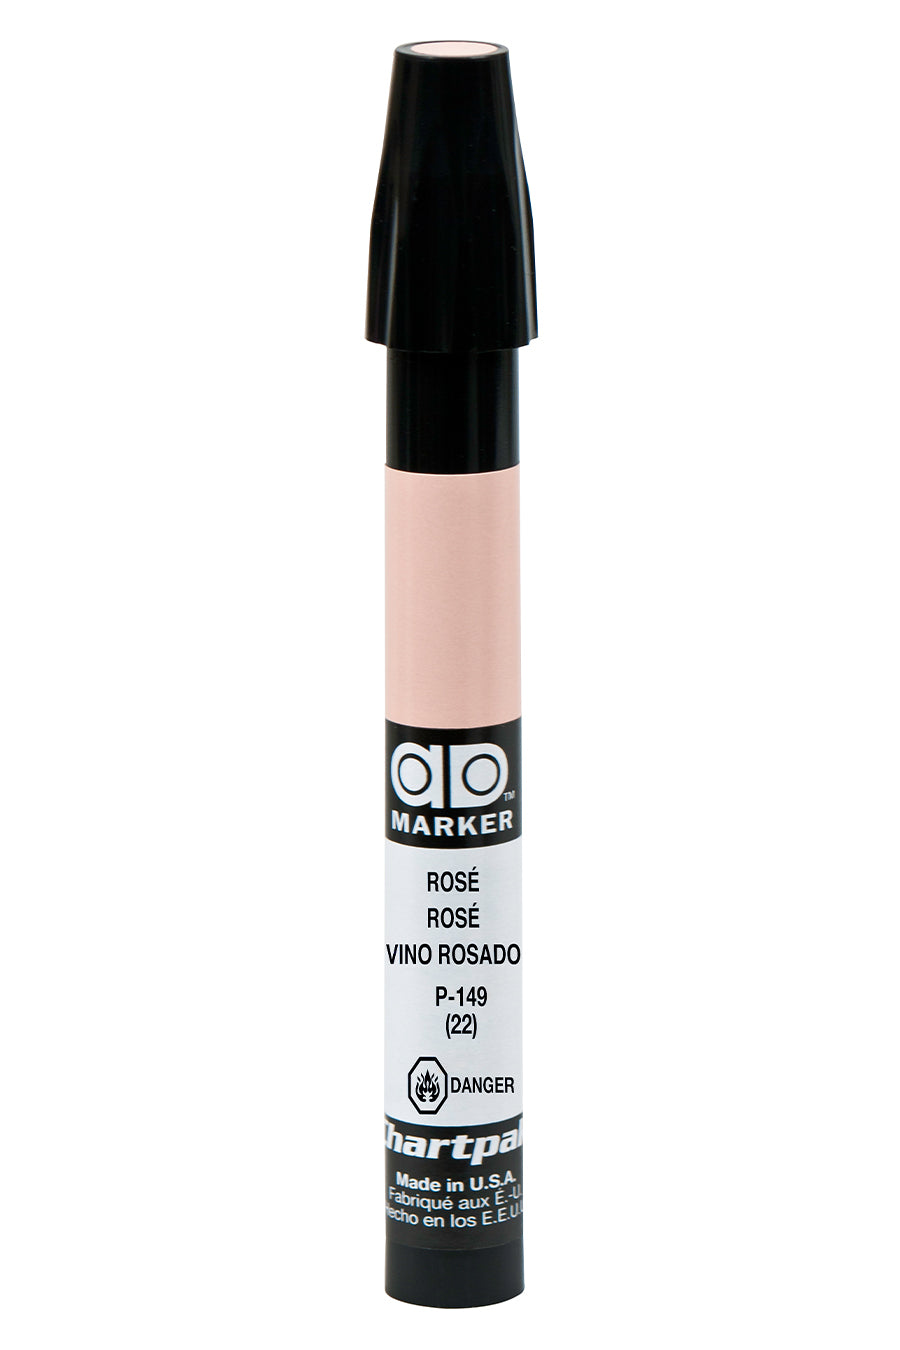 Chartpak AD® Marker Pink Color Family